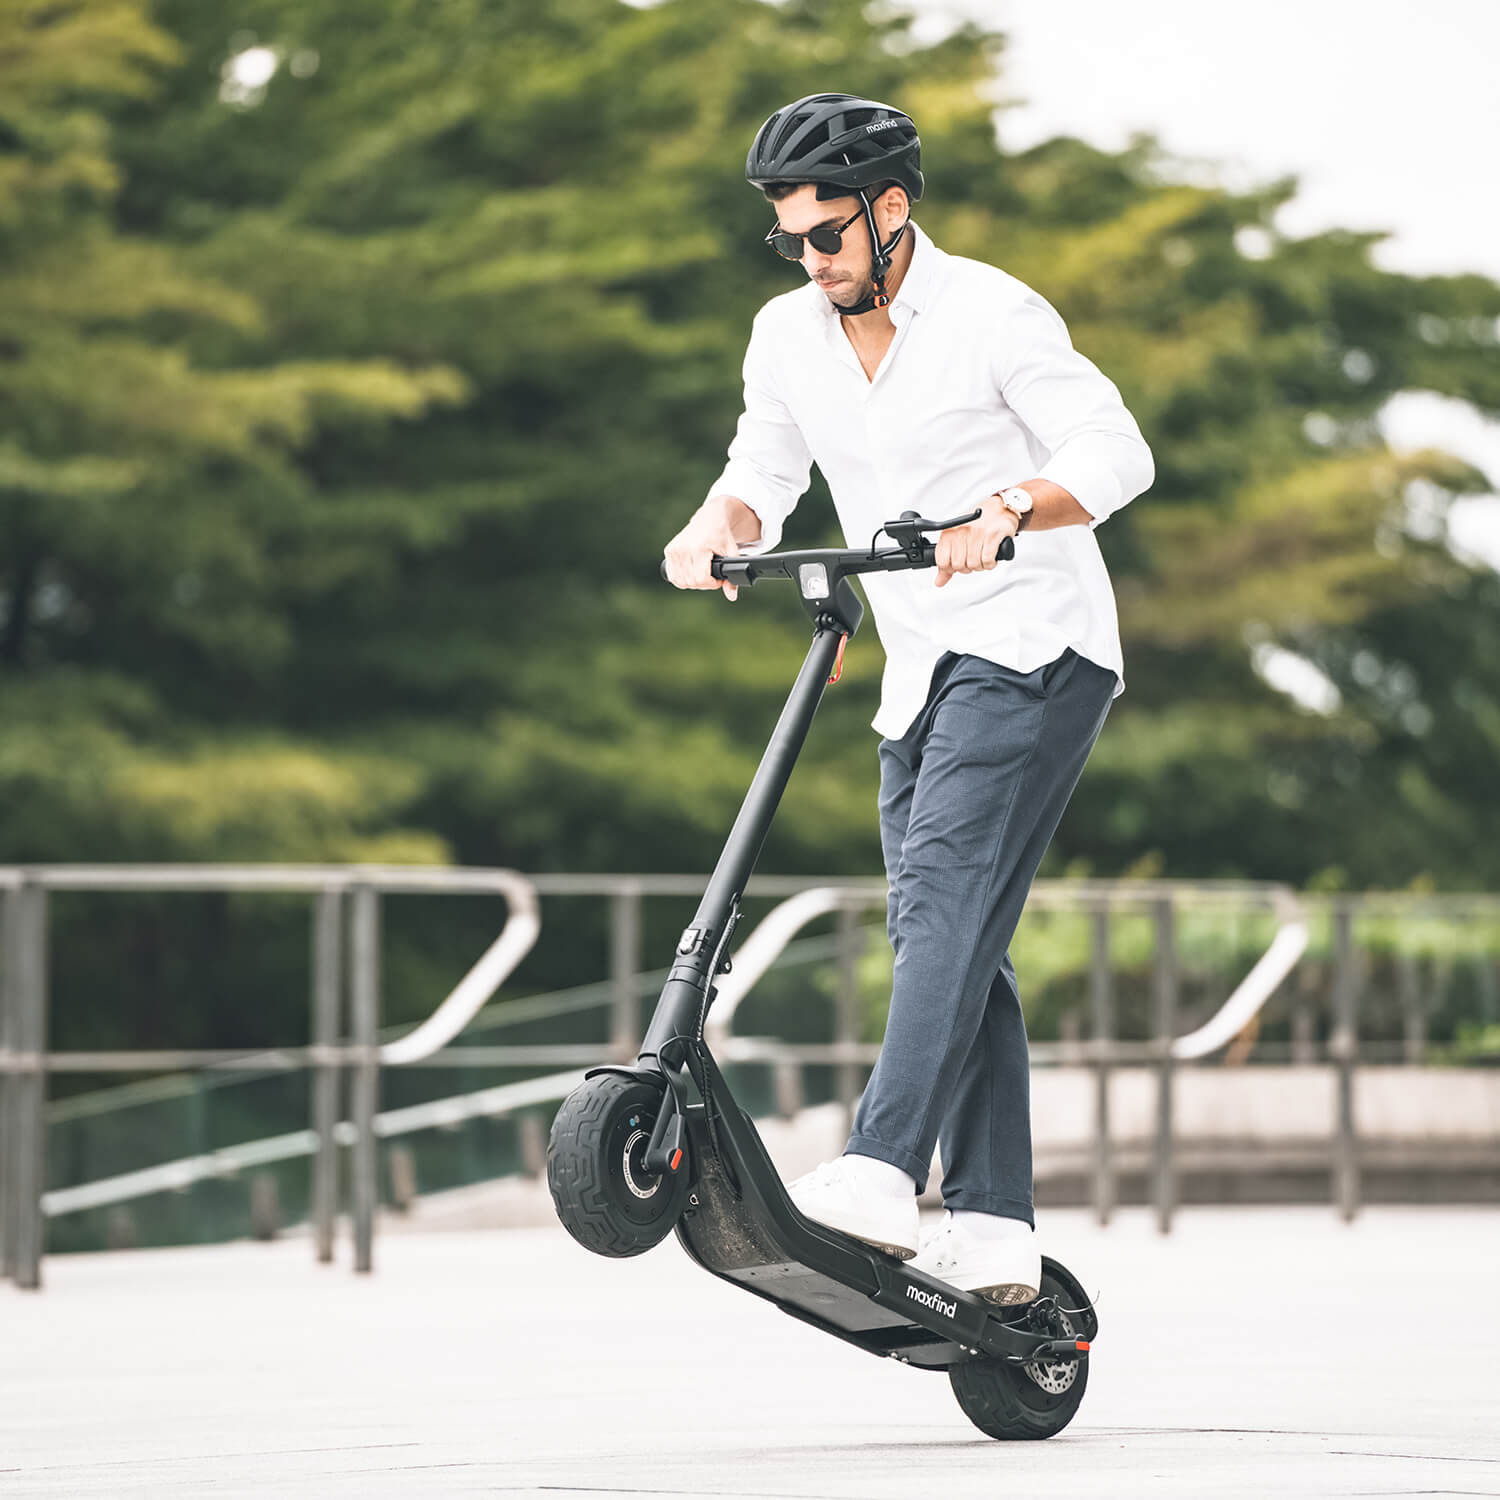 The Role of Helmet Lock Kits in E-Scooter and Micromobility Safety - Segway  Commercial